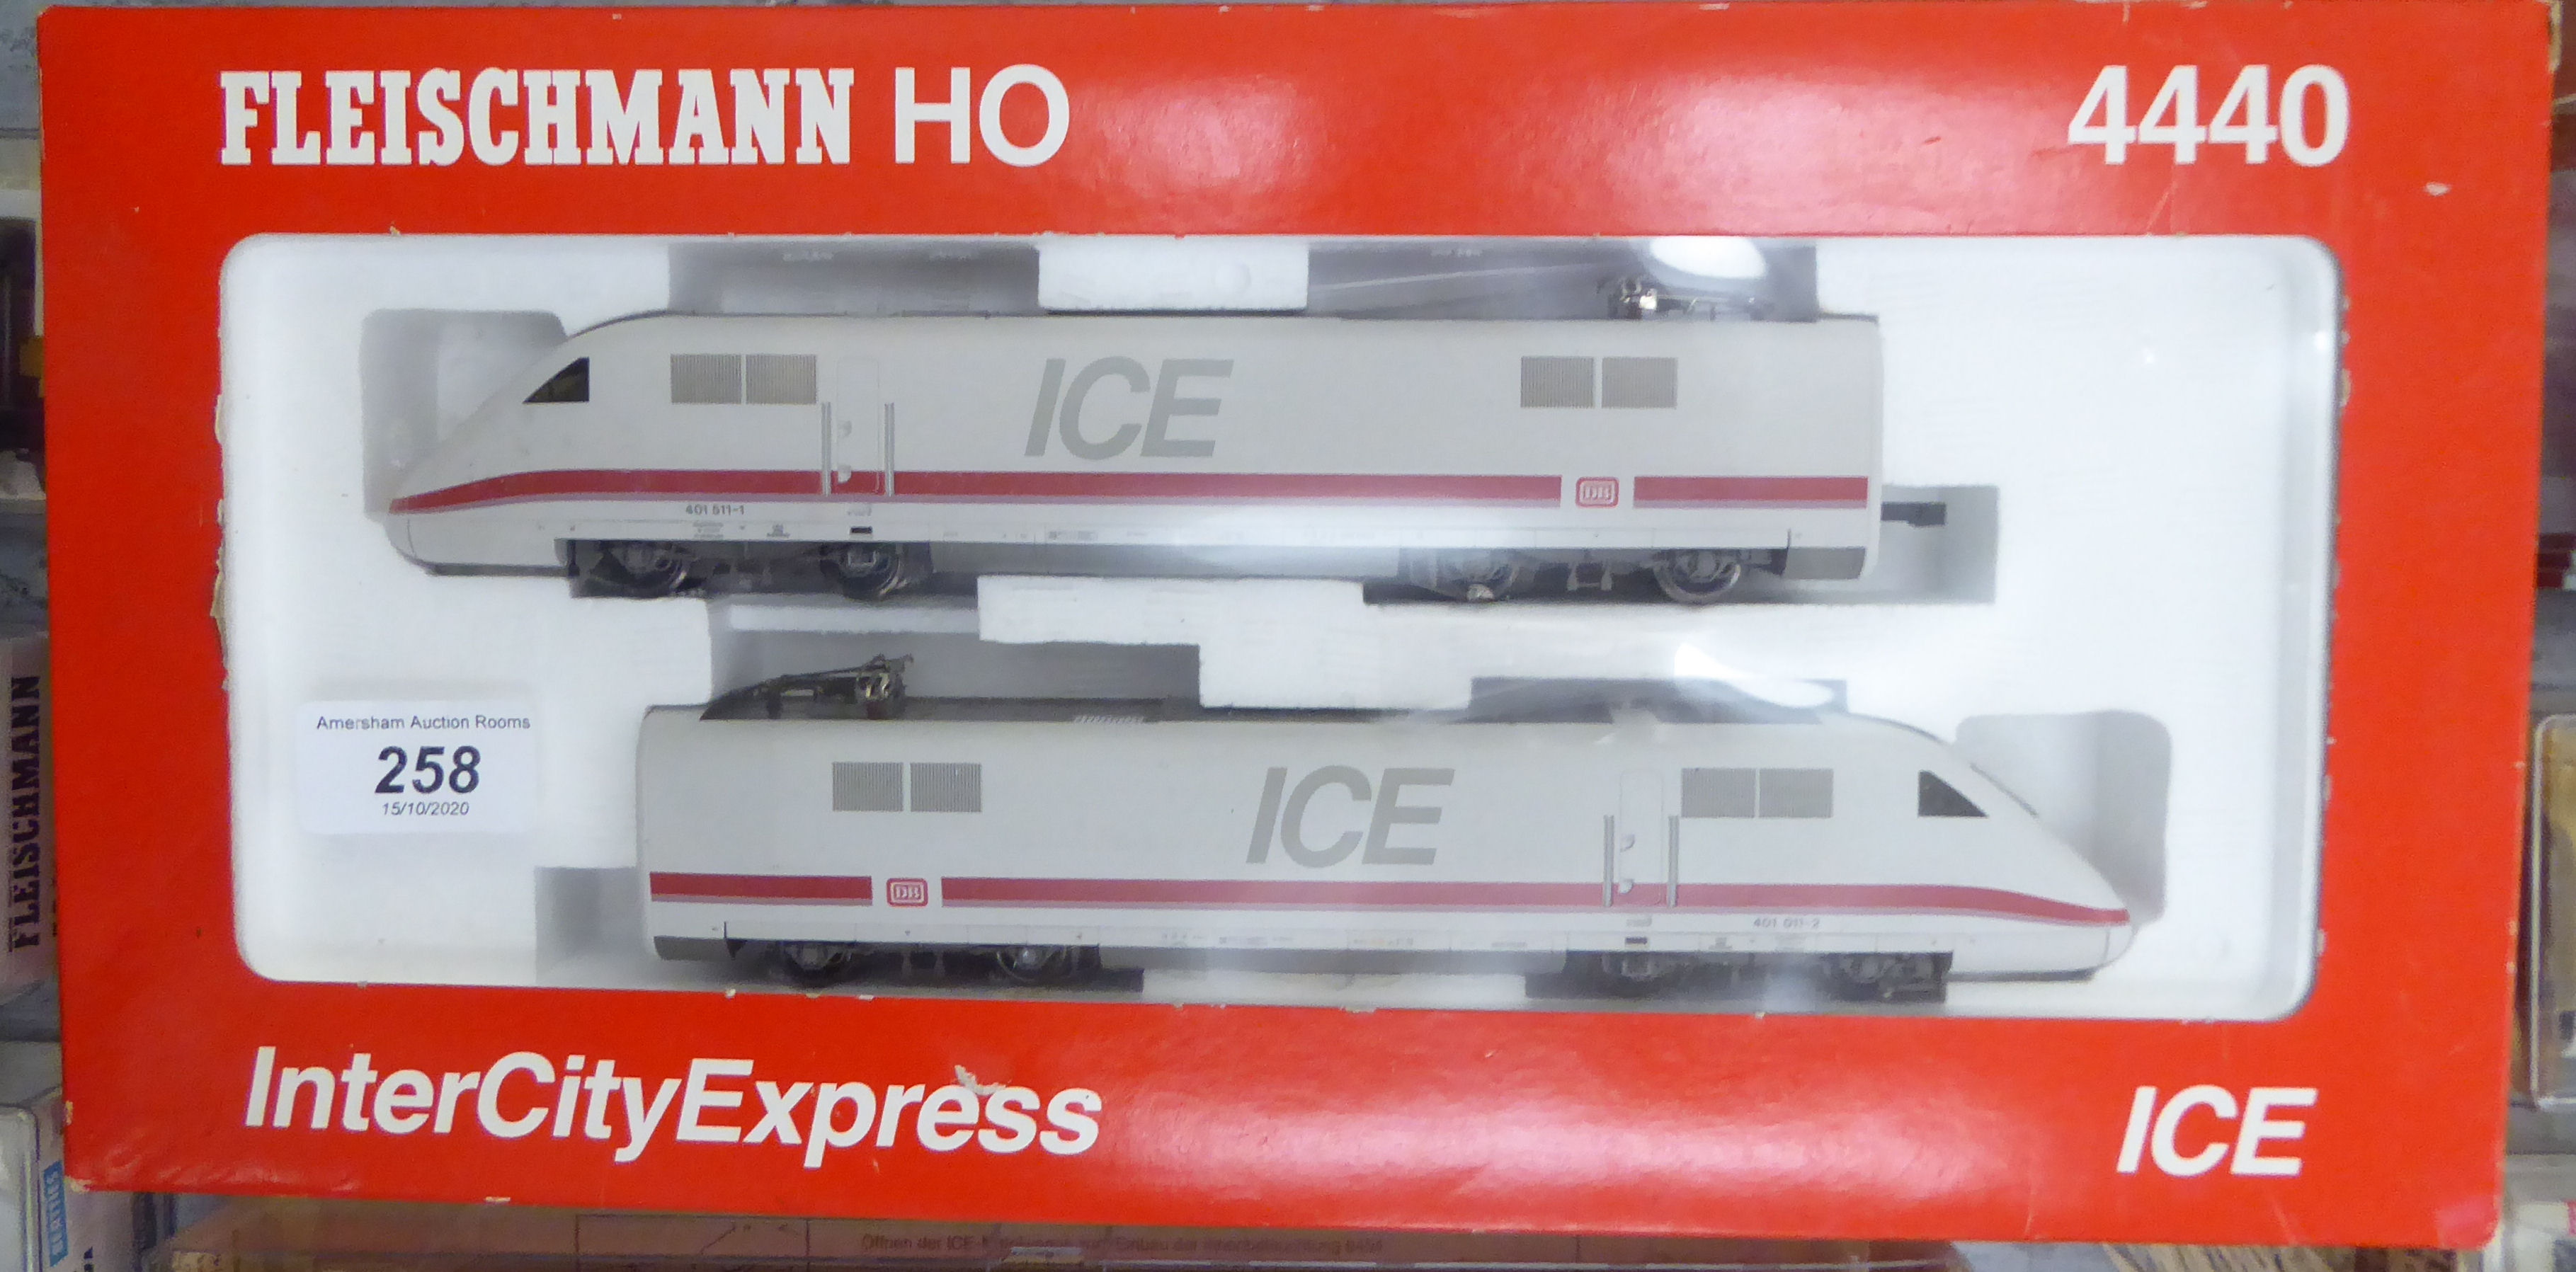 Fleischmann HO gauge model railway accessories: to include an Intercity Express and various coaches - Image 4 of 8